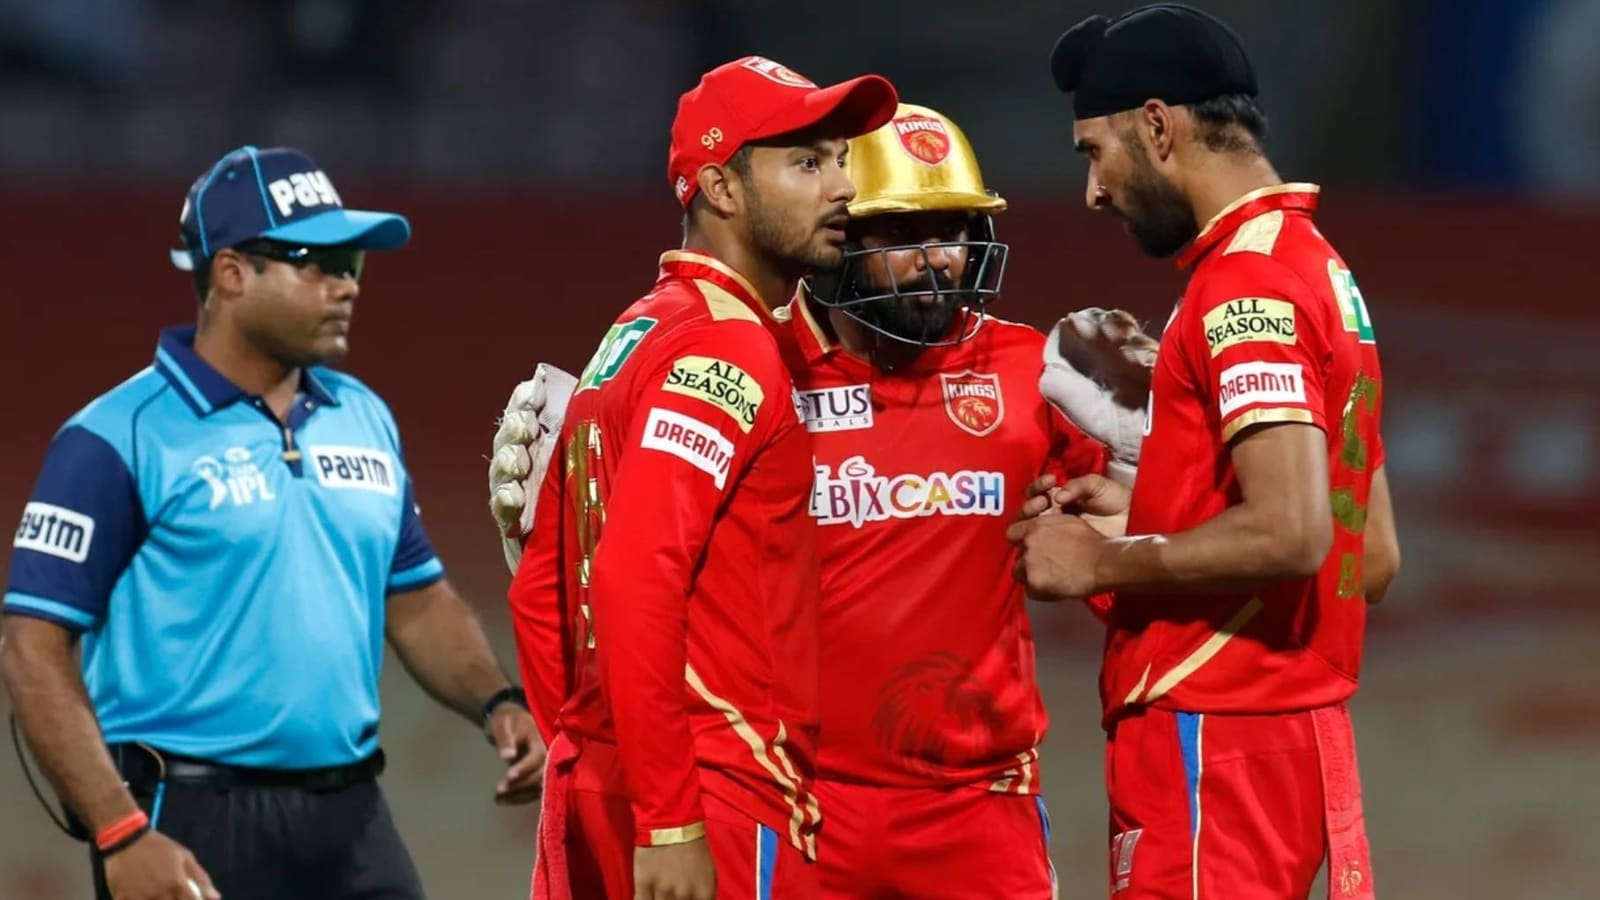 PBKS Vs LSG IPL 2022 Match 42: Full Preview, Probable XIs, Pitch Report, And Dream11 Team Prediction | SportzPoint.com